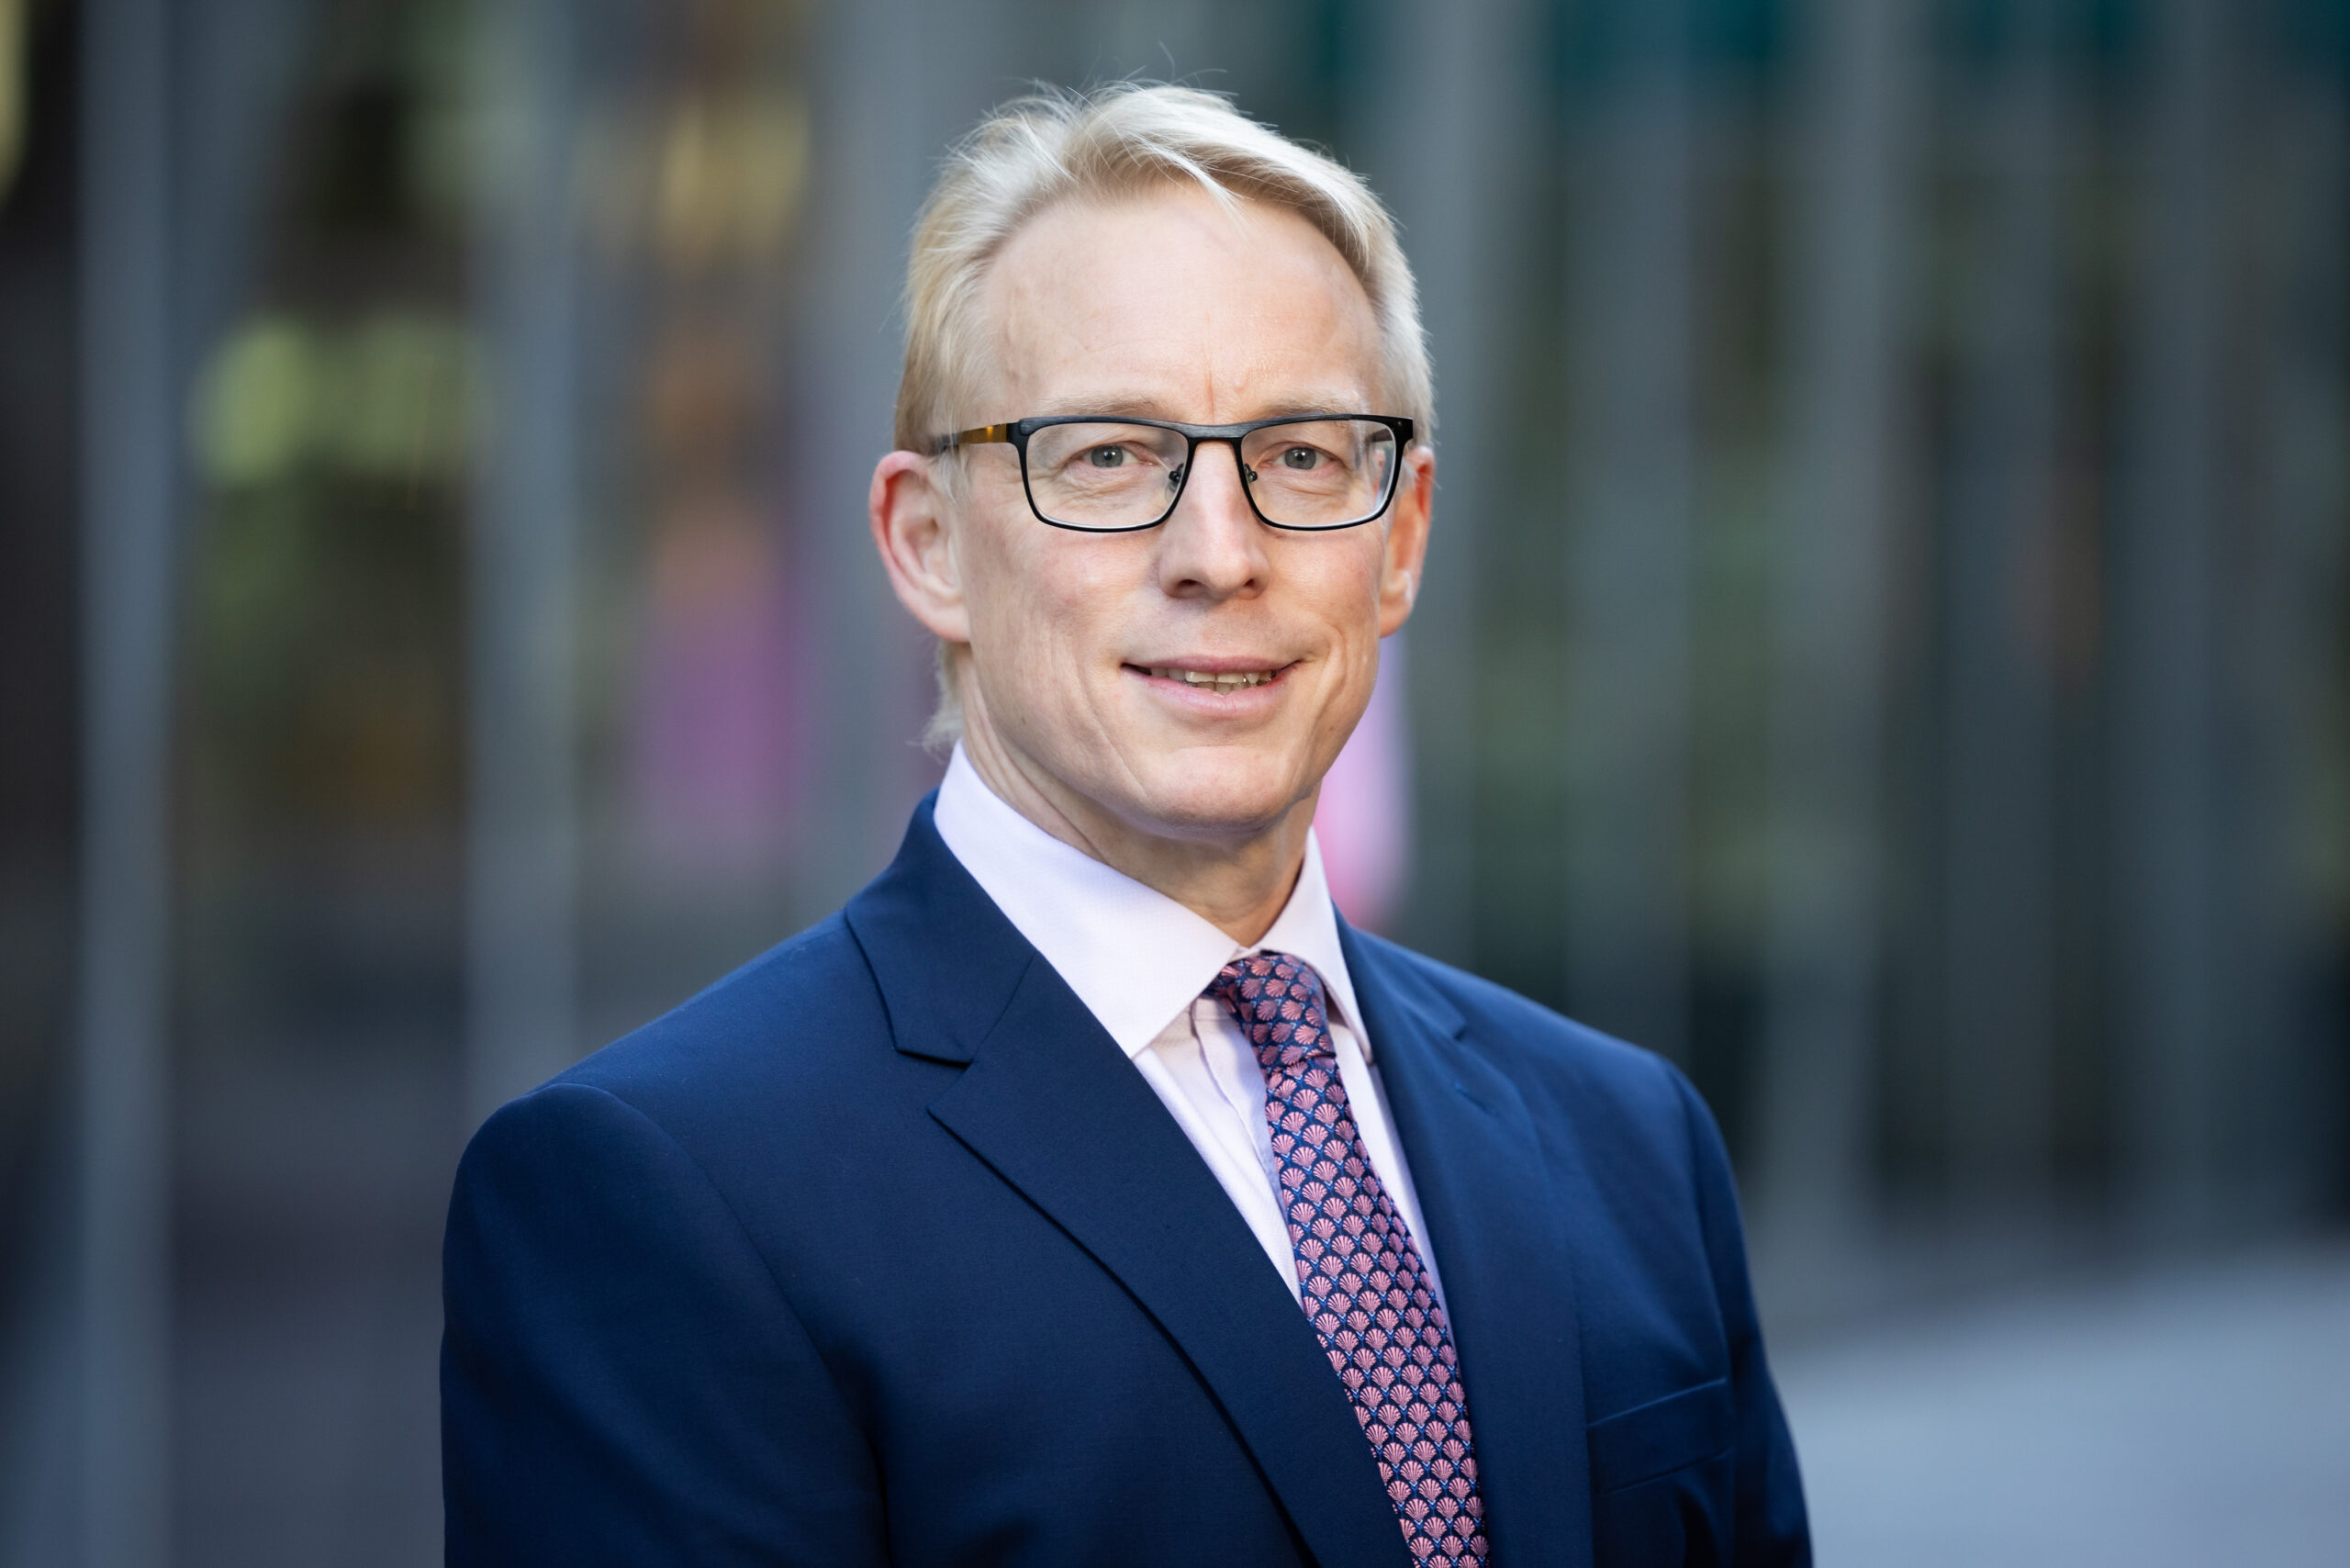 James Ashworth in Conversation with Property Auction News